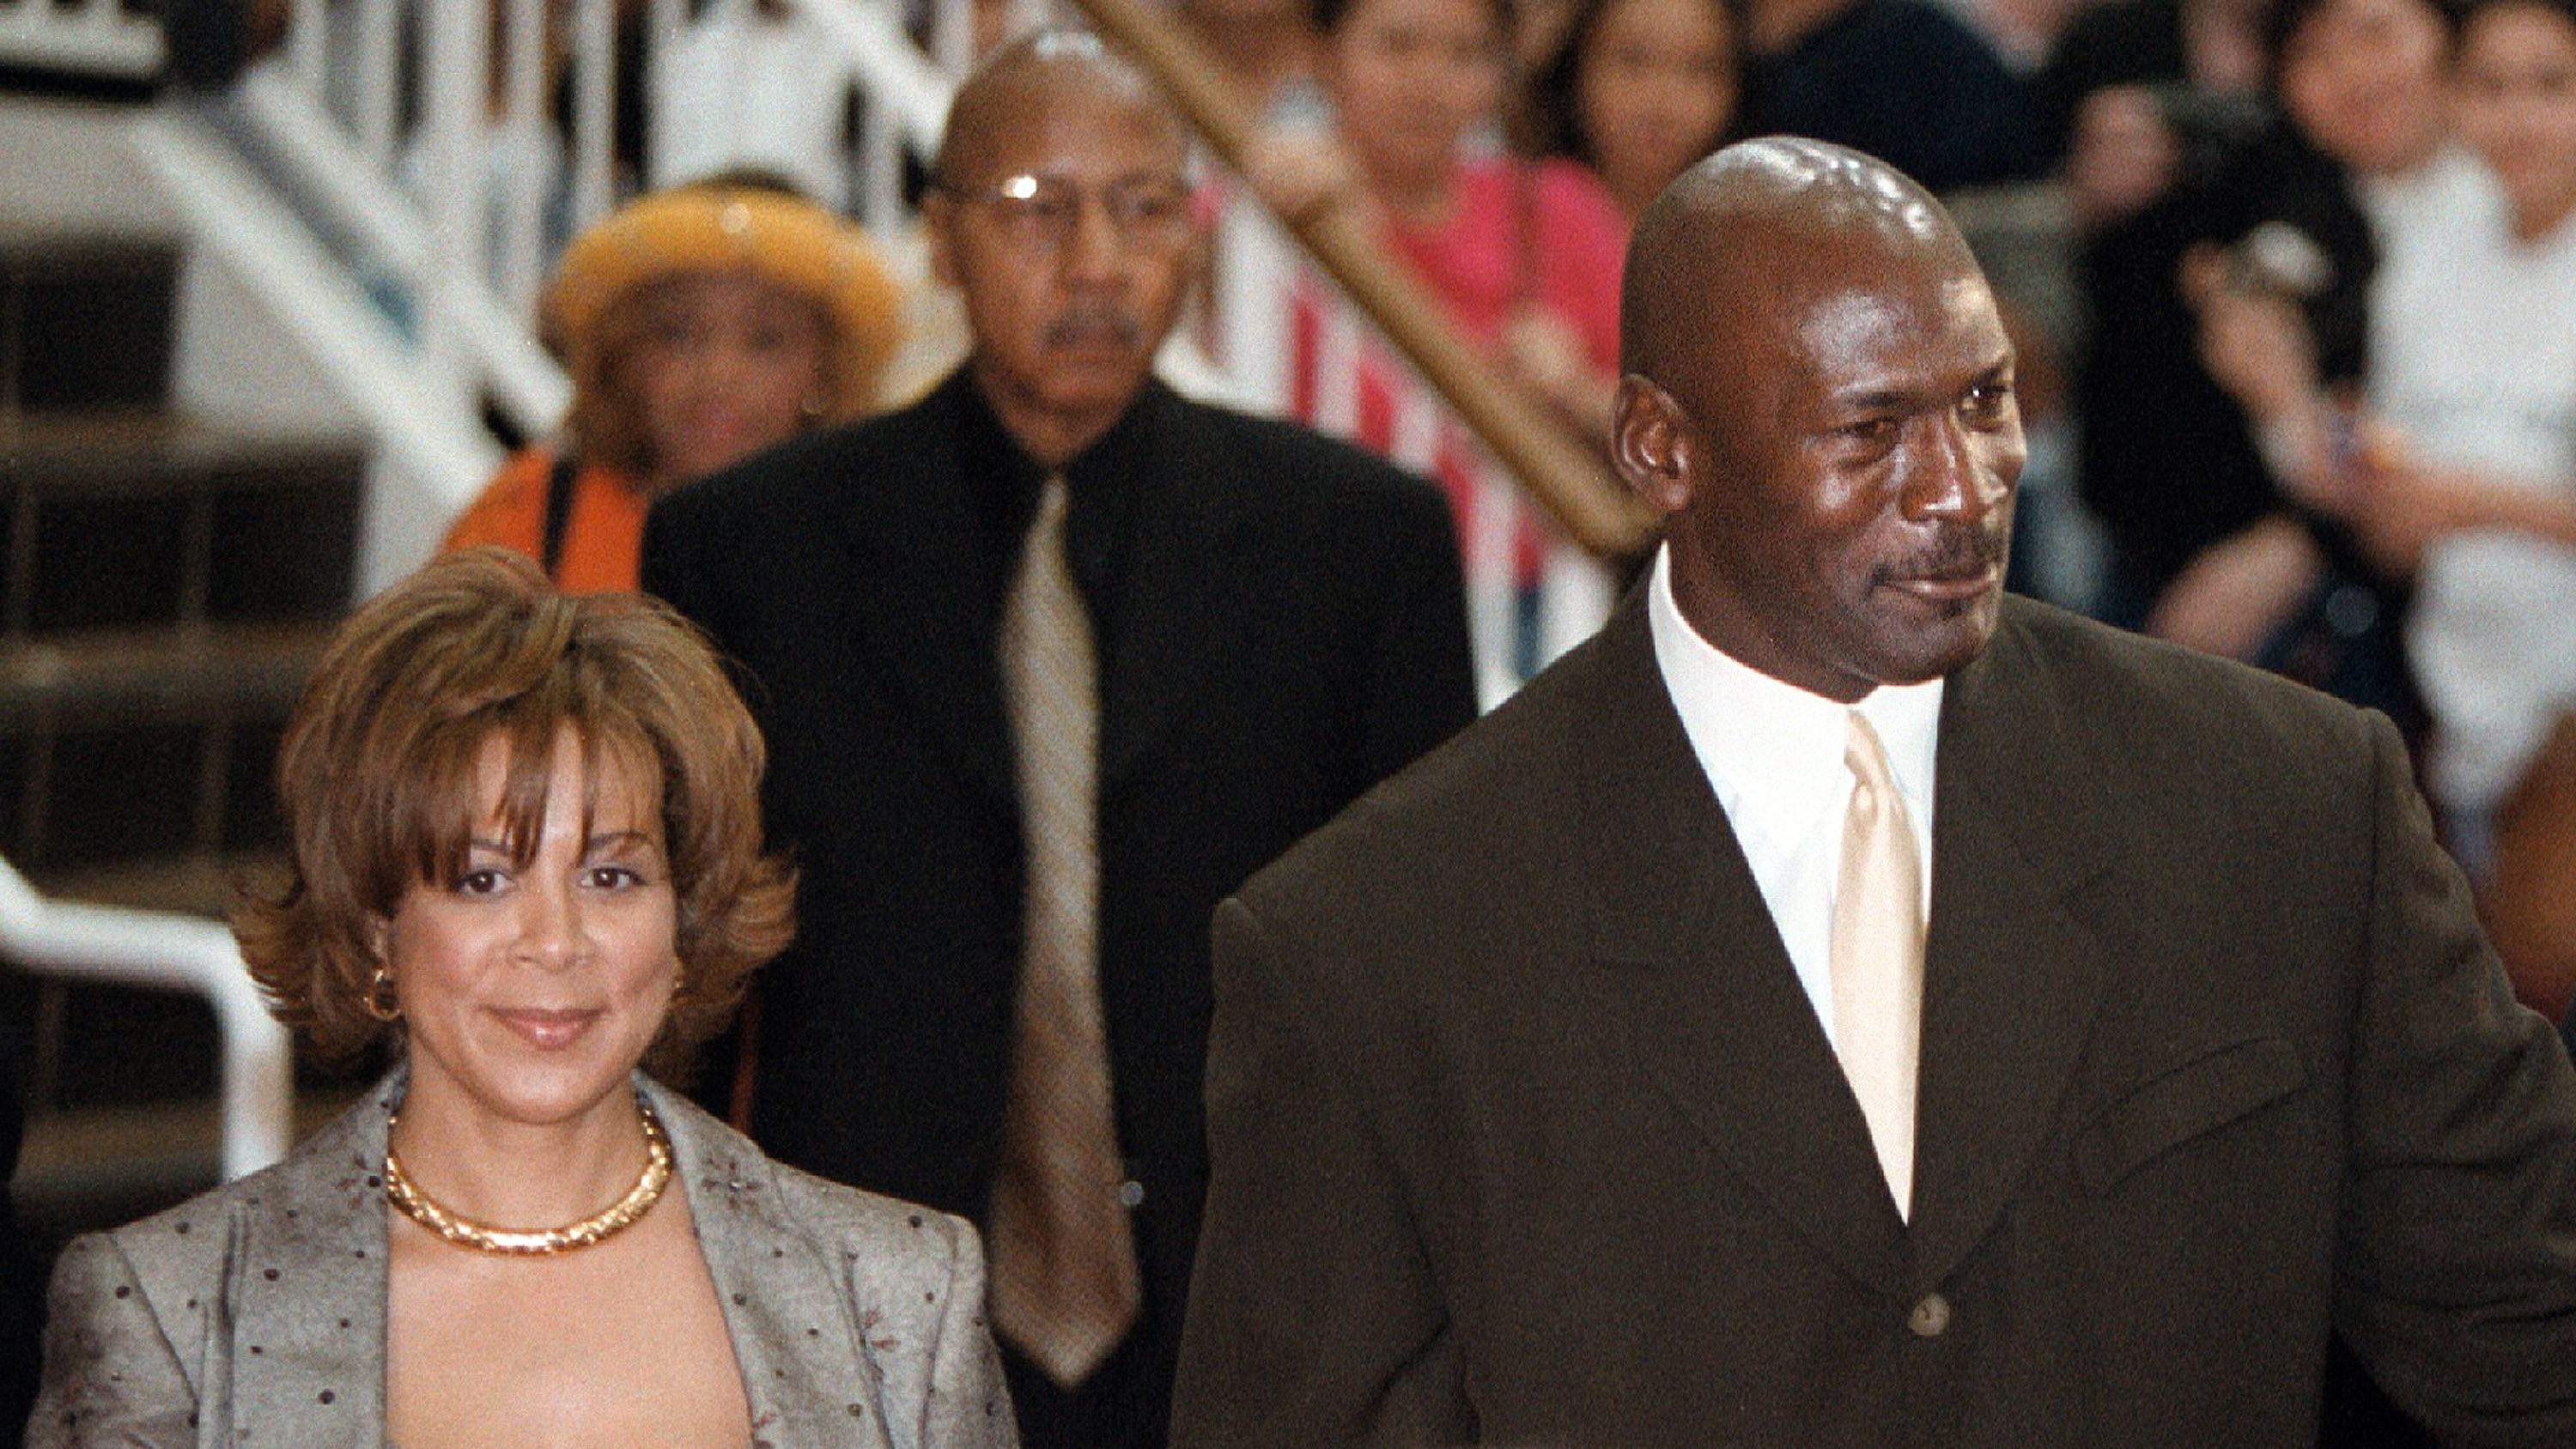 Michael Jordan and wife Juanita at the world premier of "Michael Jordan To The Max" in 2000 in Chicago | Source: Getty Images/GlobalImagesUkraine